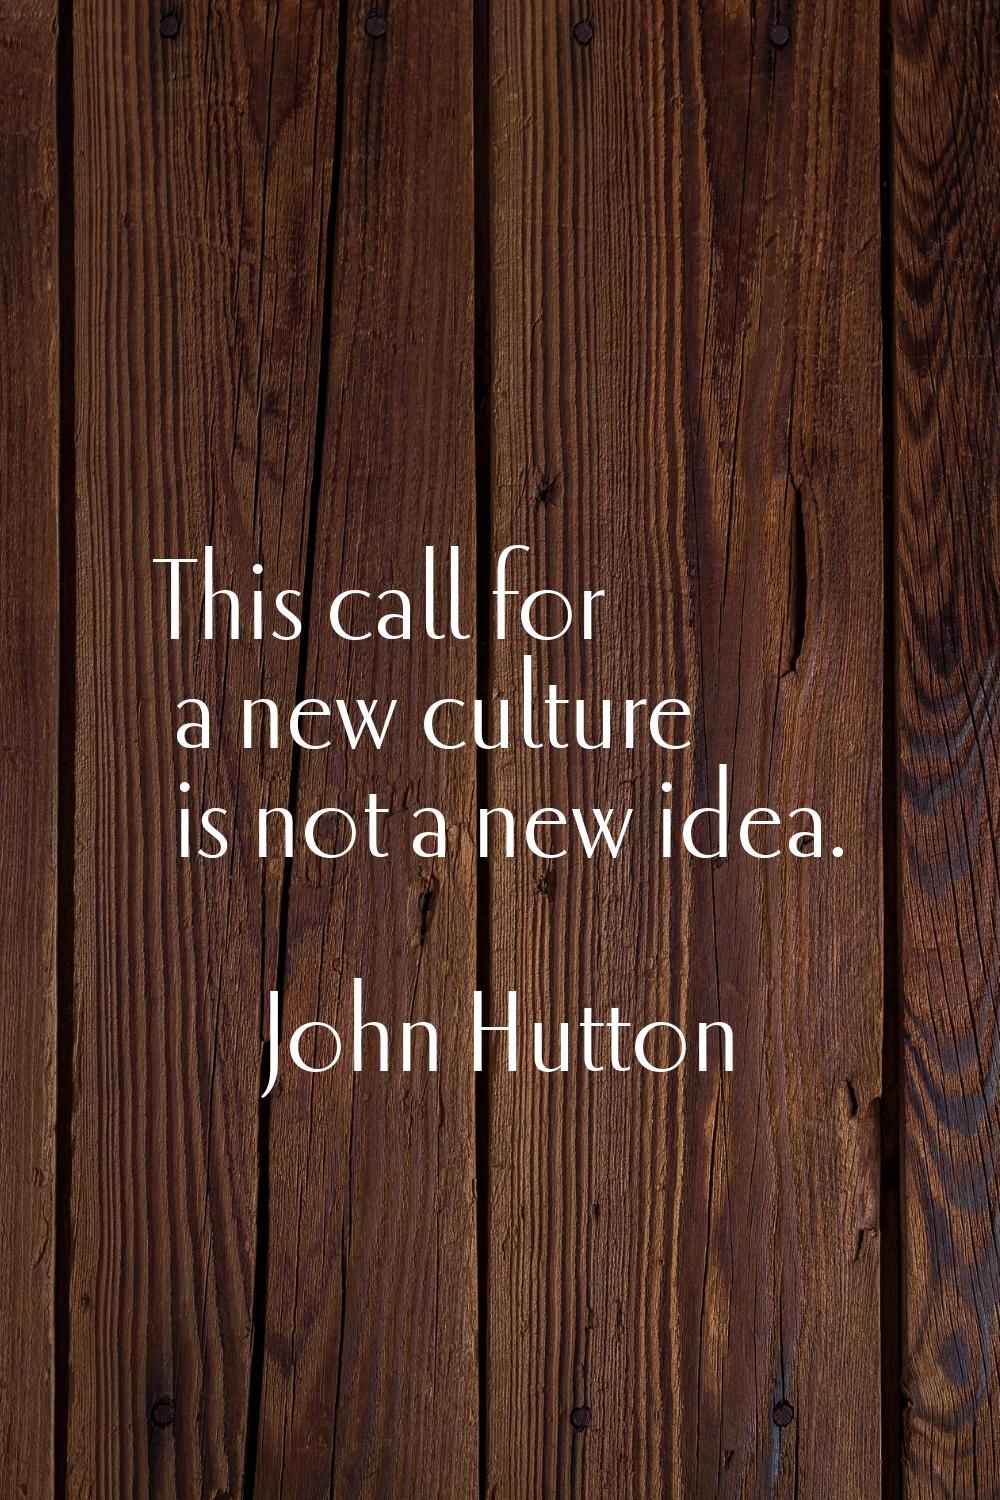 This call for a new culture is not a new idea.